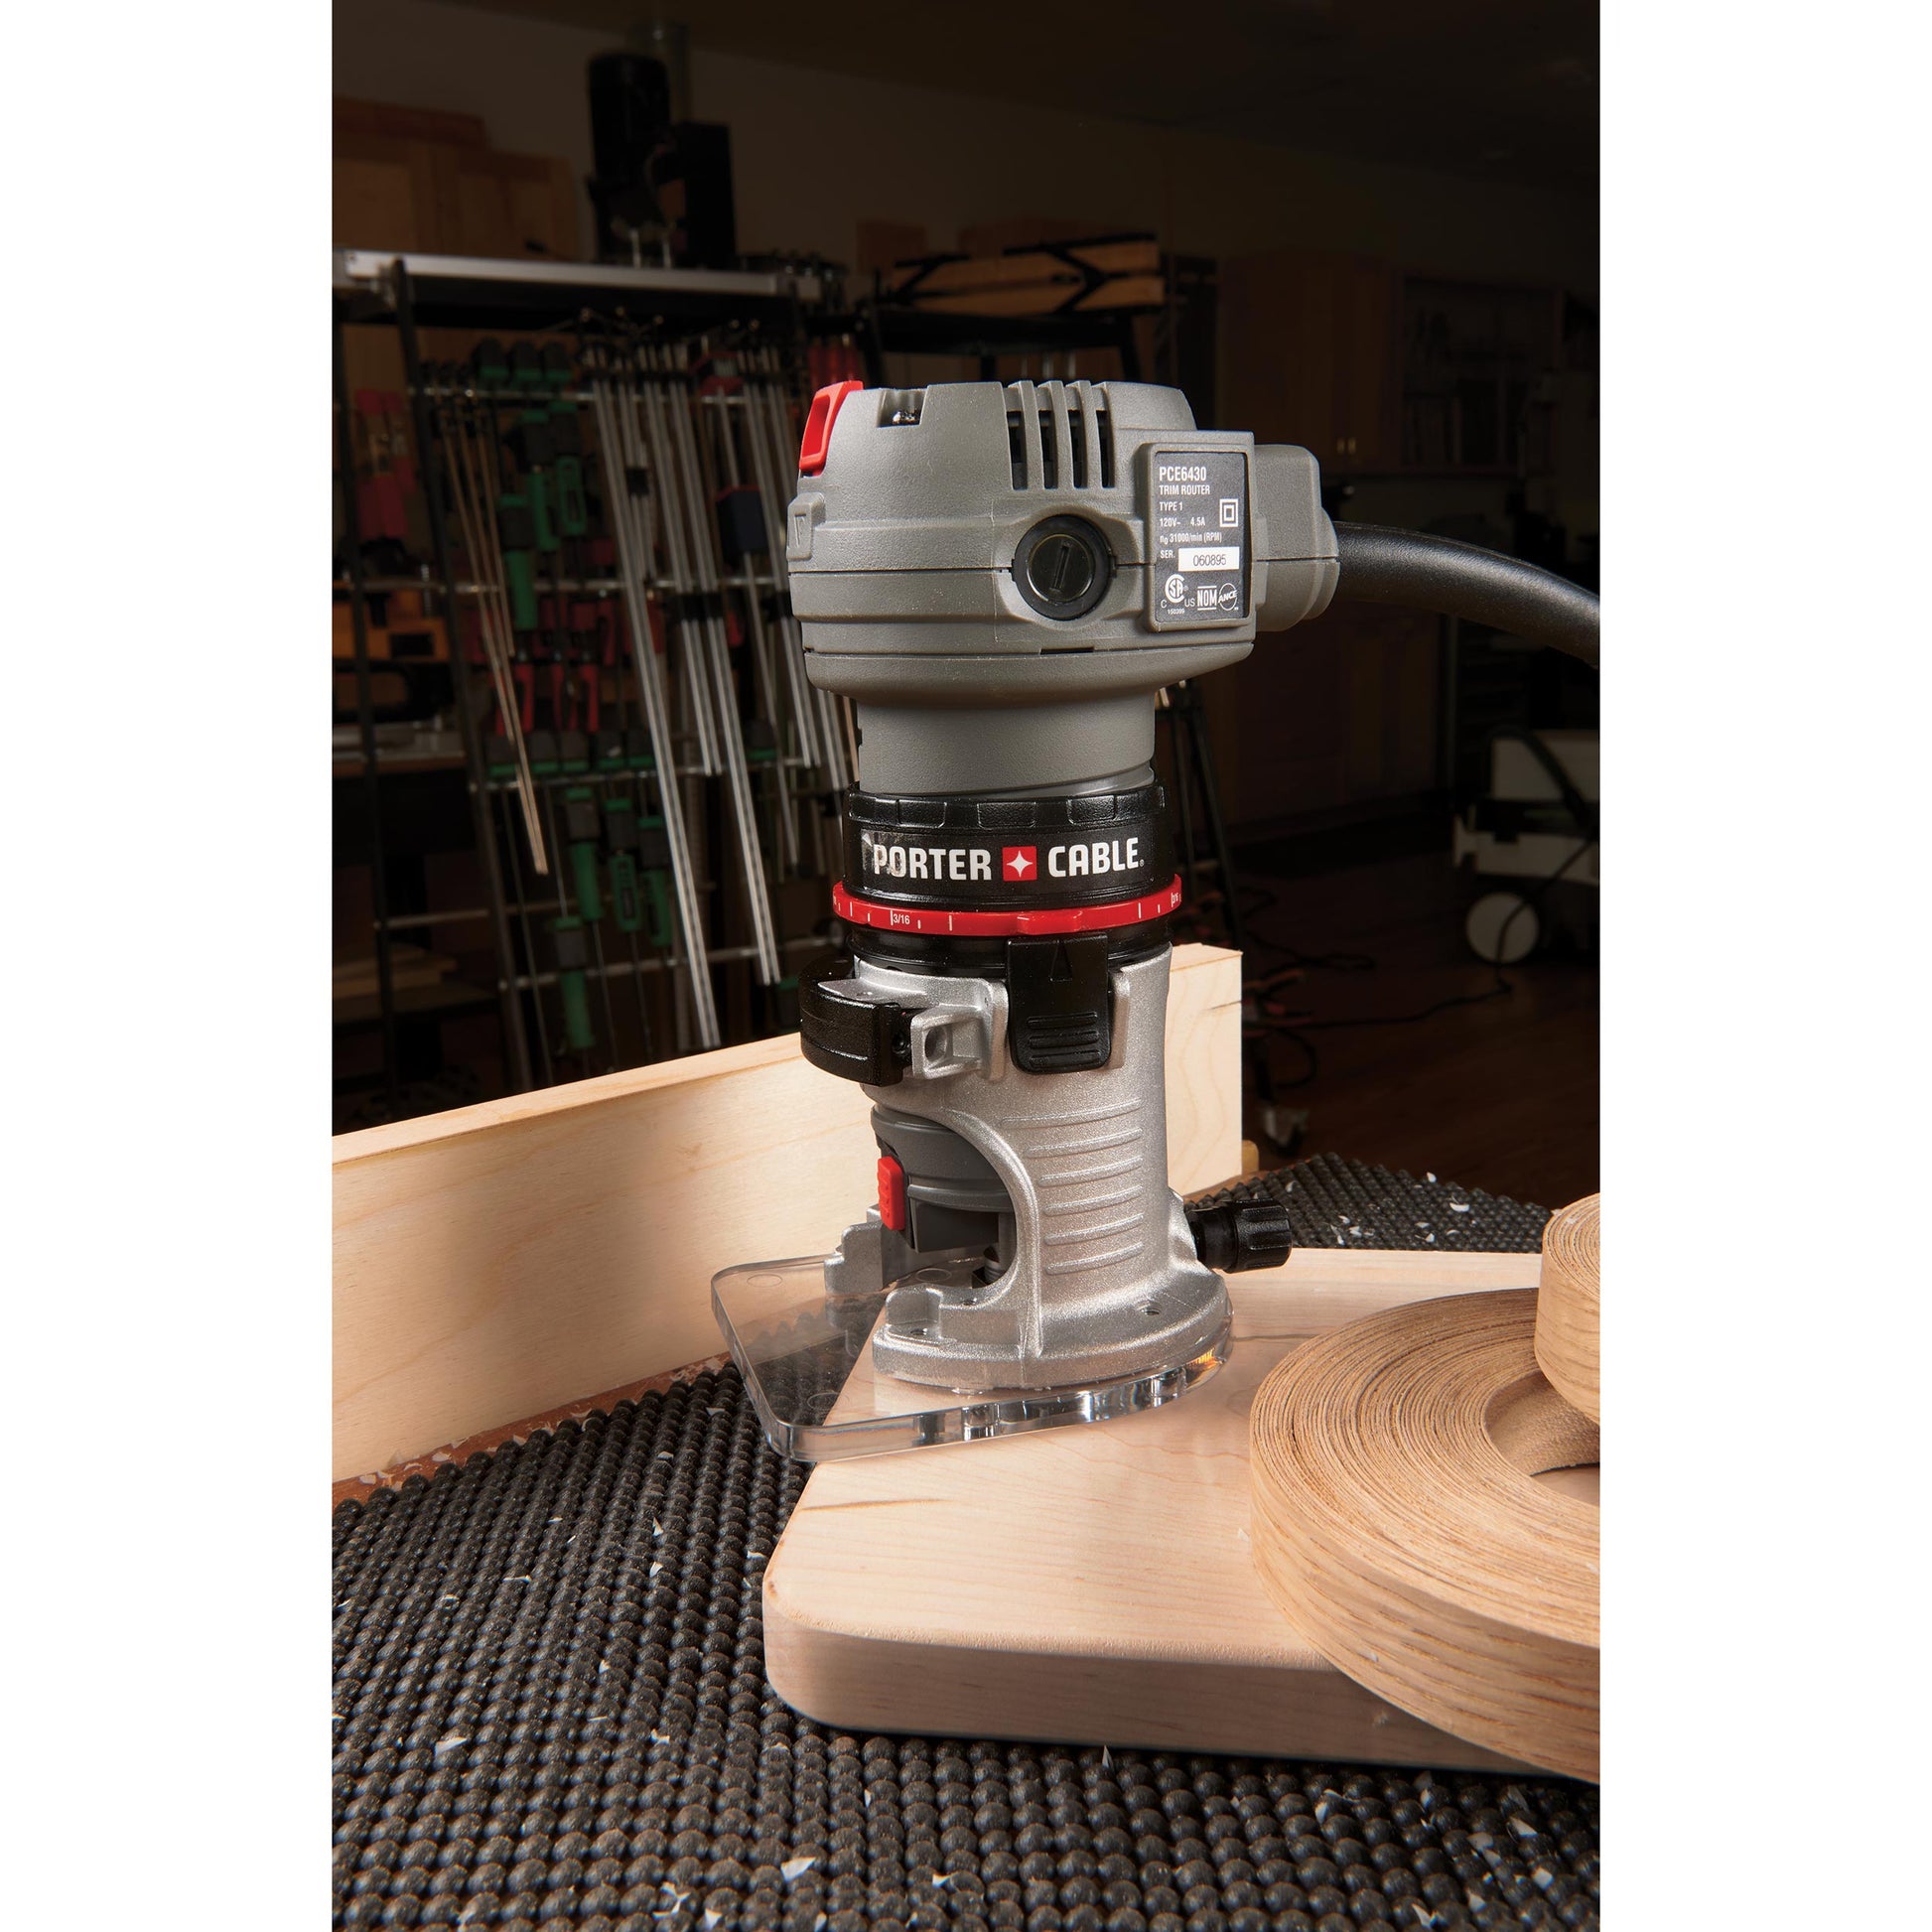 Porter Cable 4.5A Laminate Trimmer / Router | Woodcraft